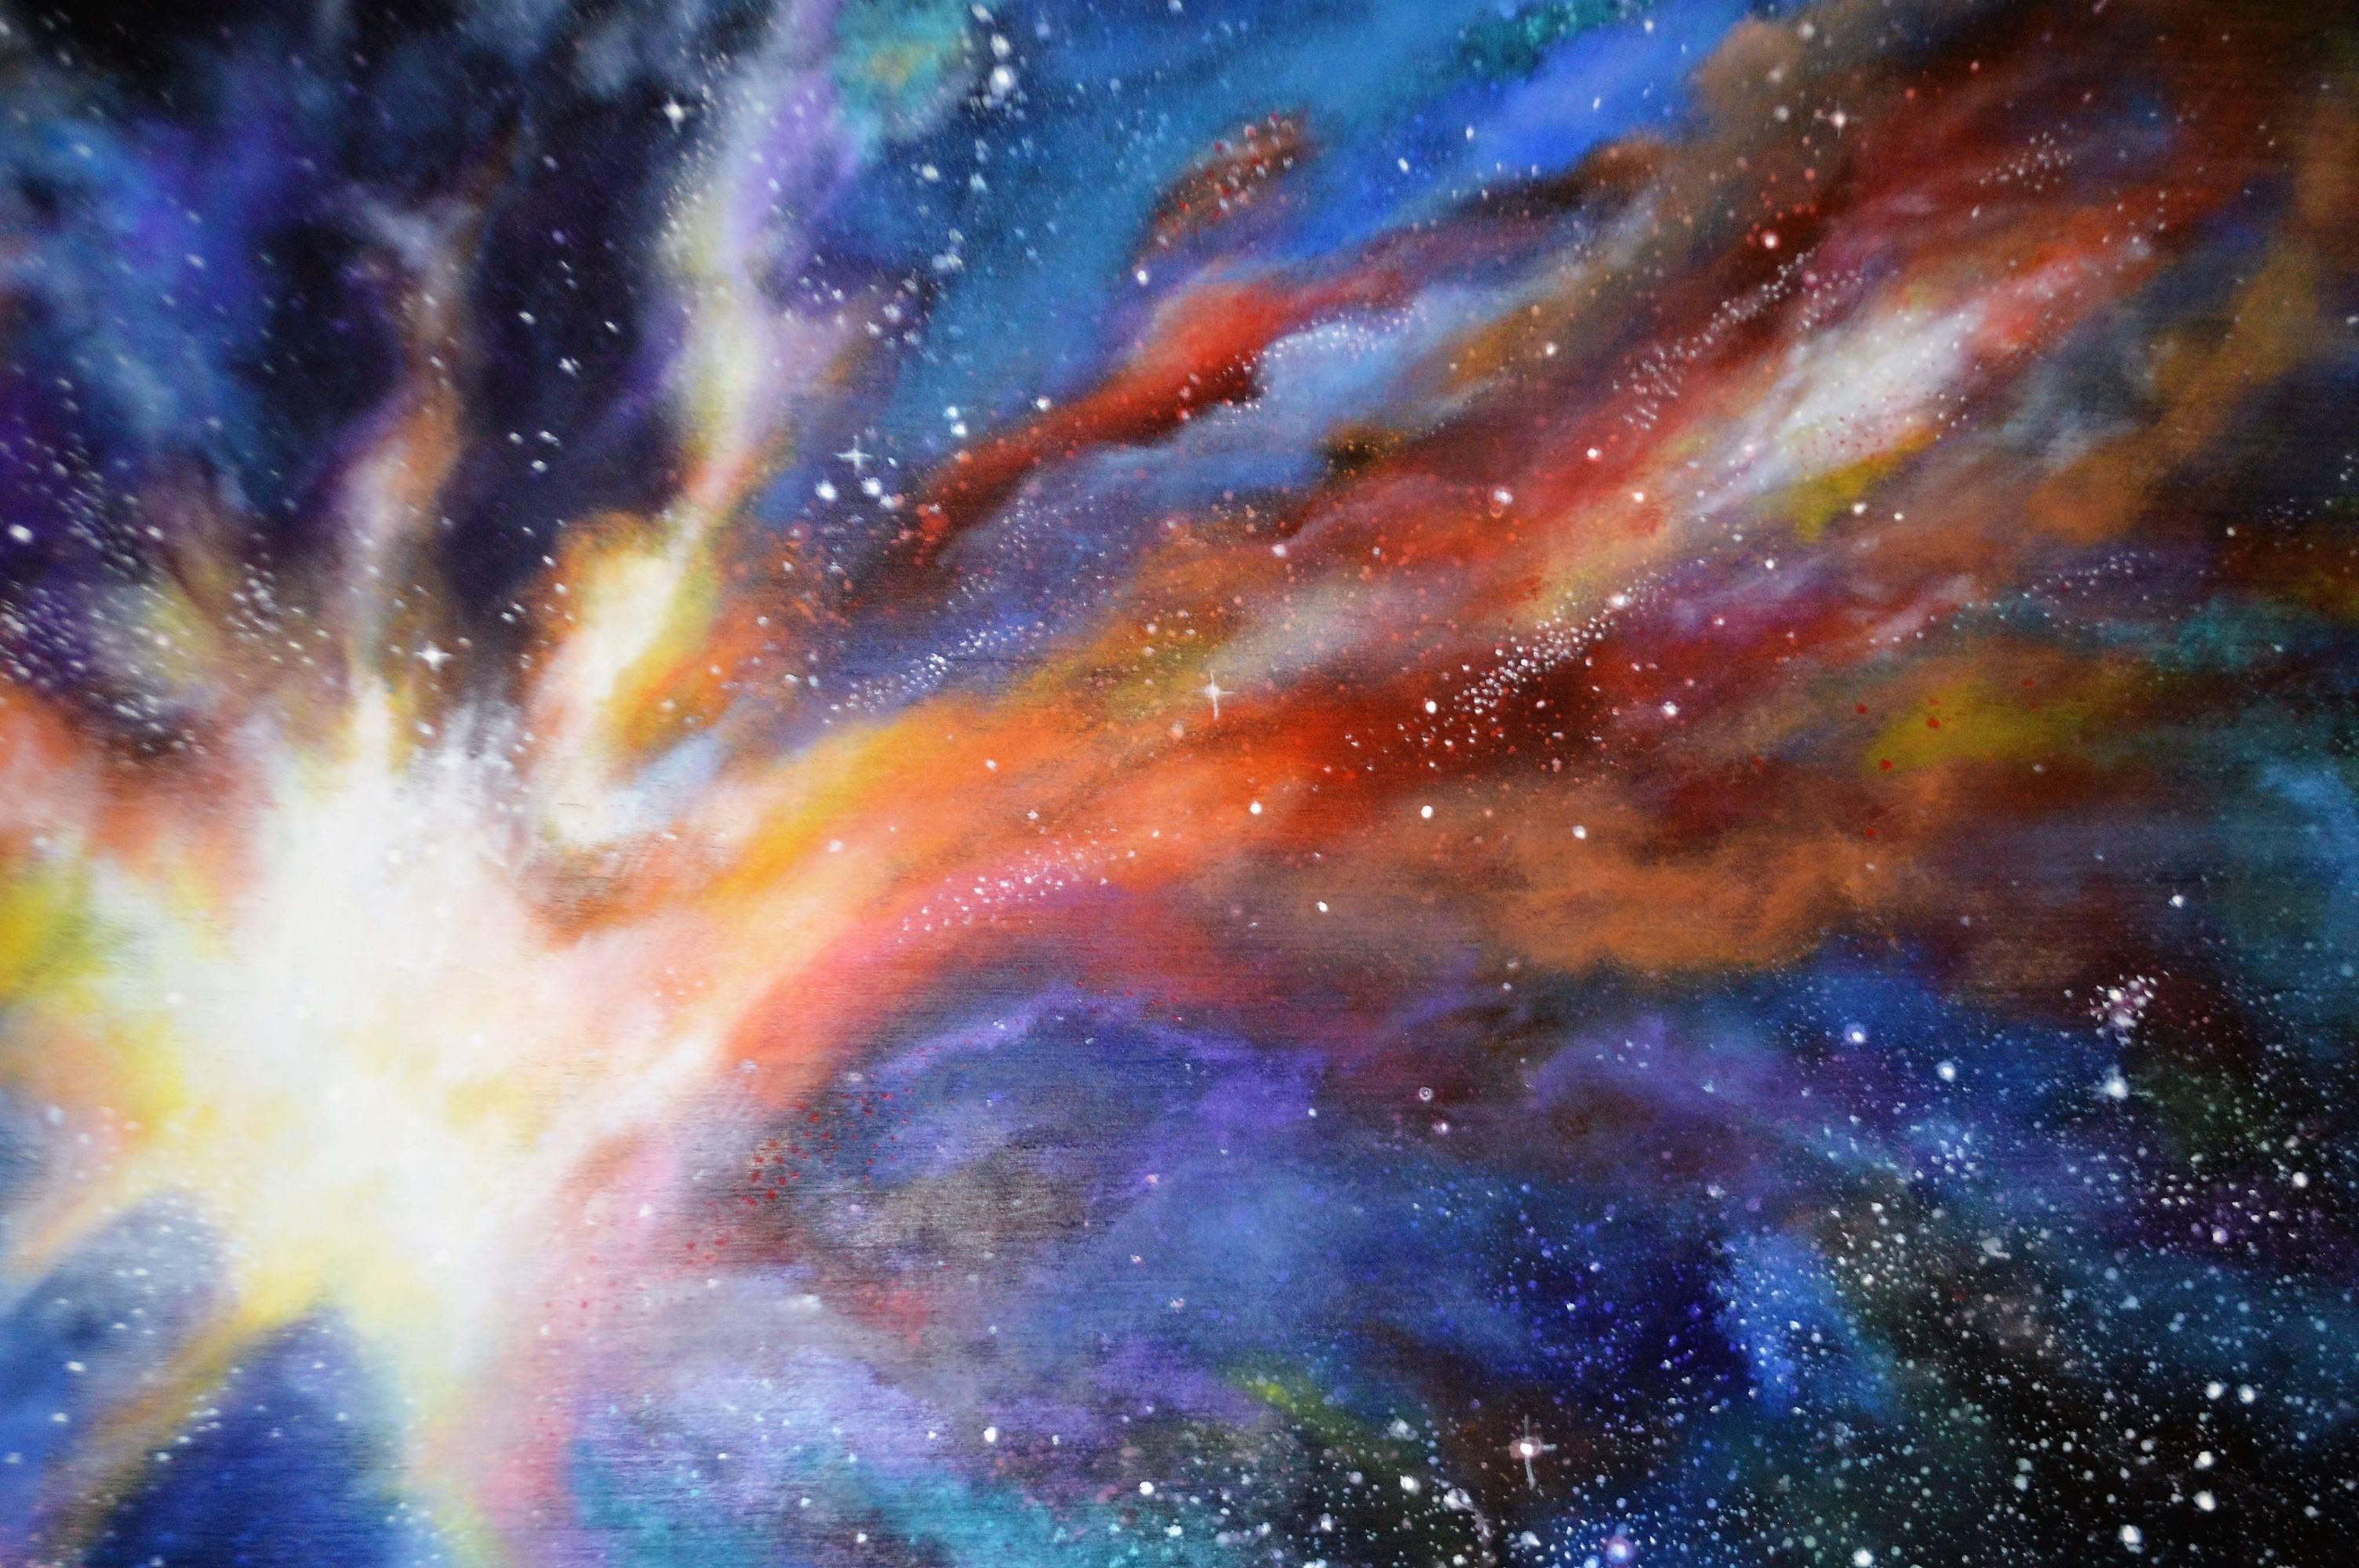 Canadian Acrylic Painting on Board from a Photo from Starry Deep Space Nebula Telescope For Sale